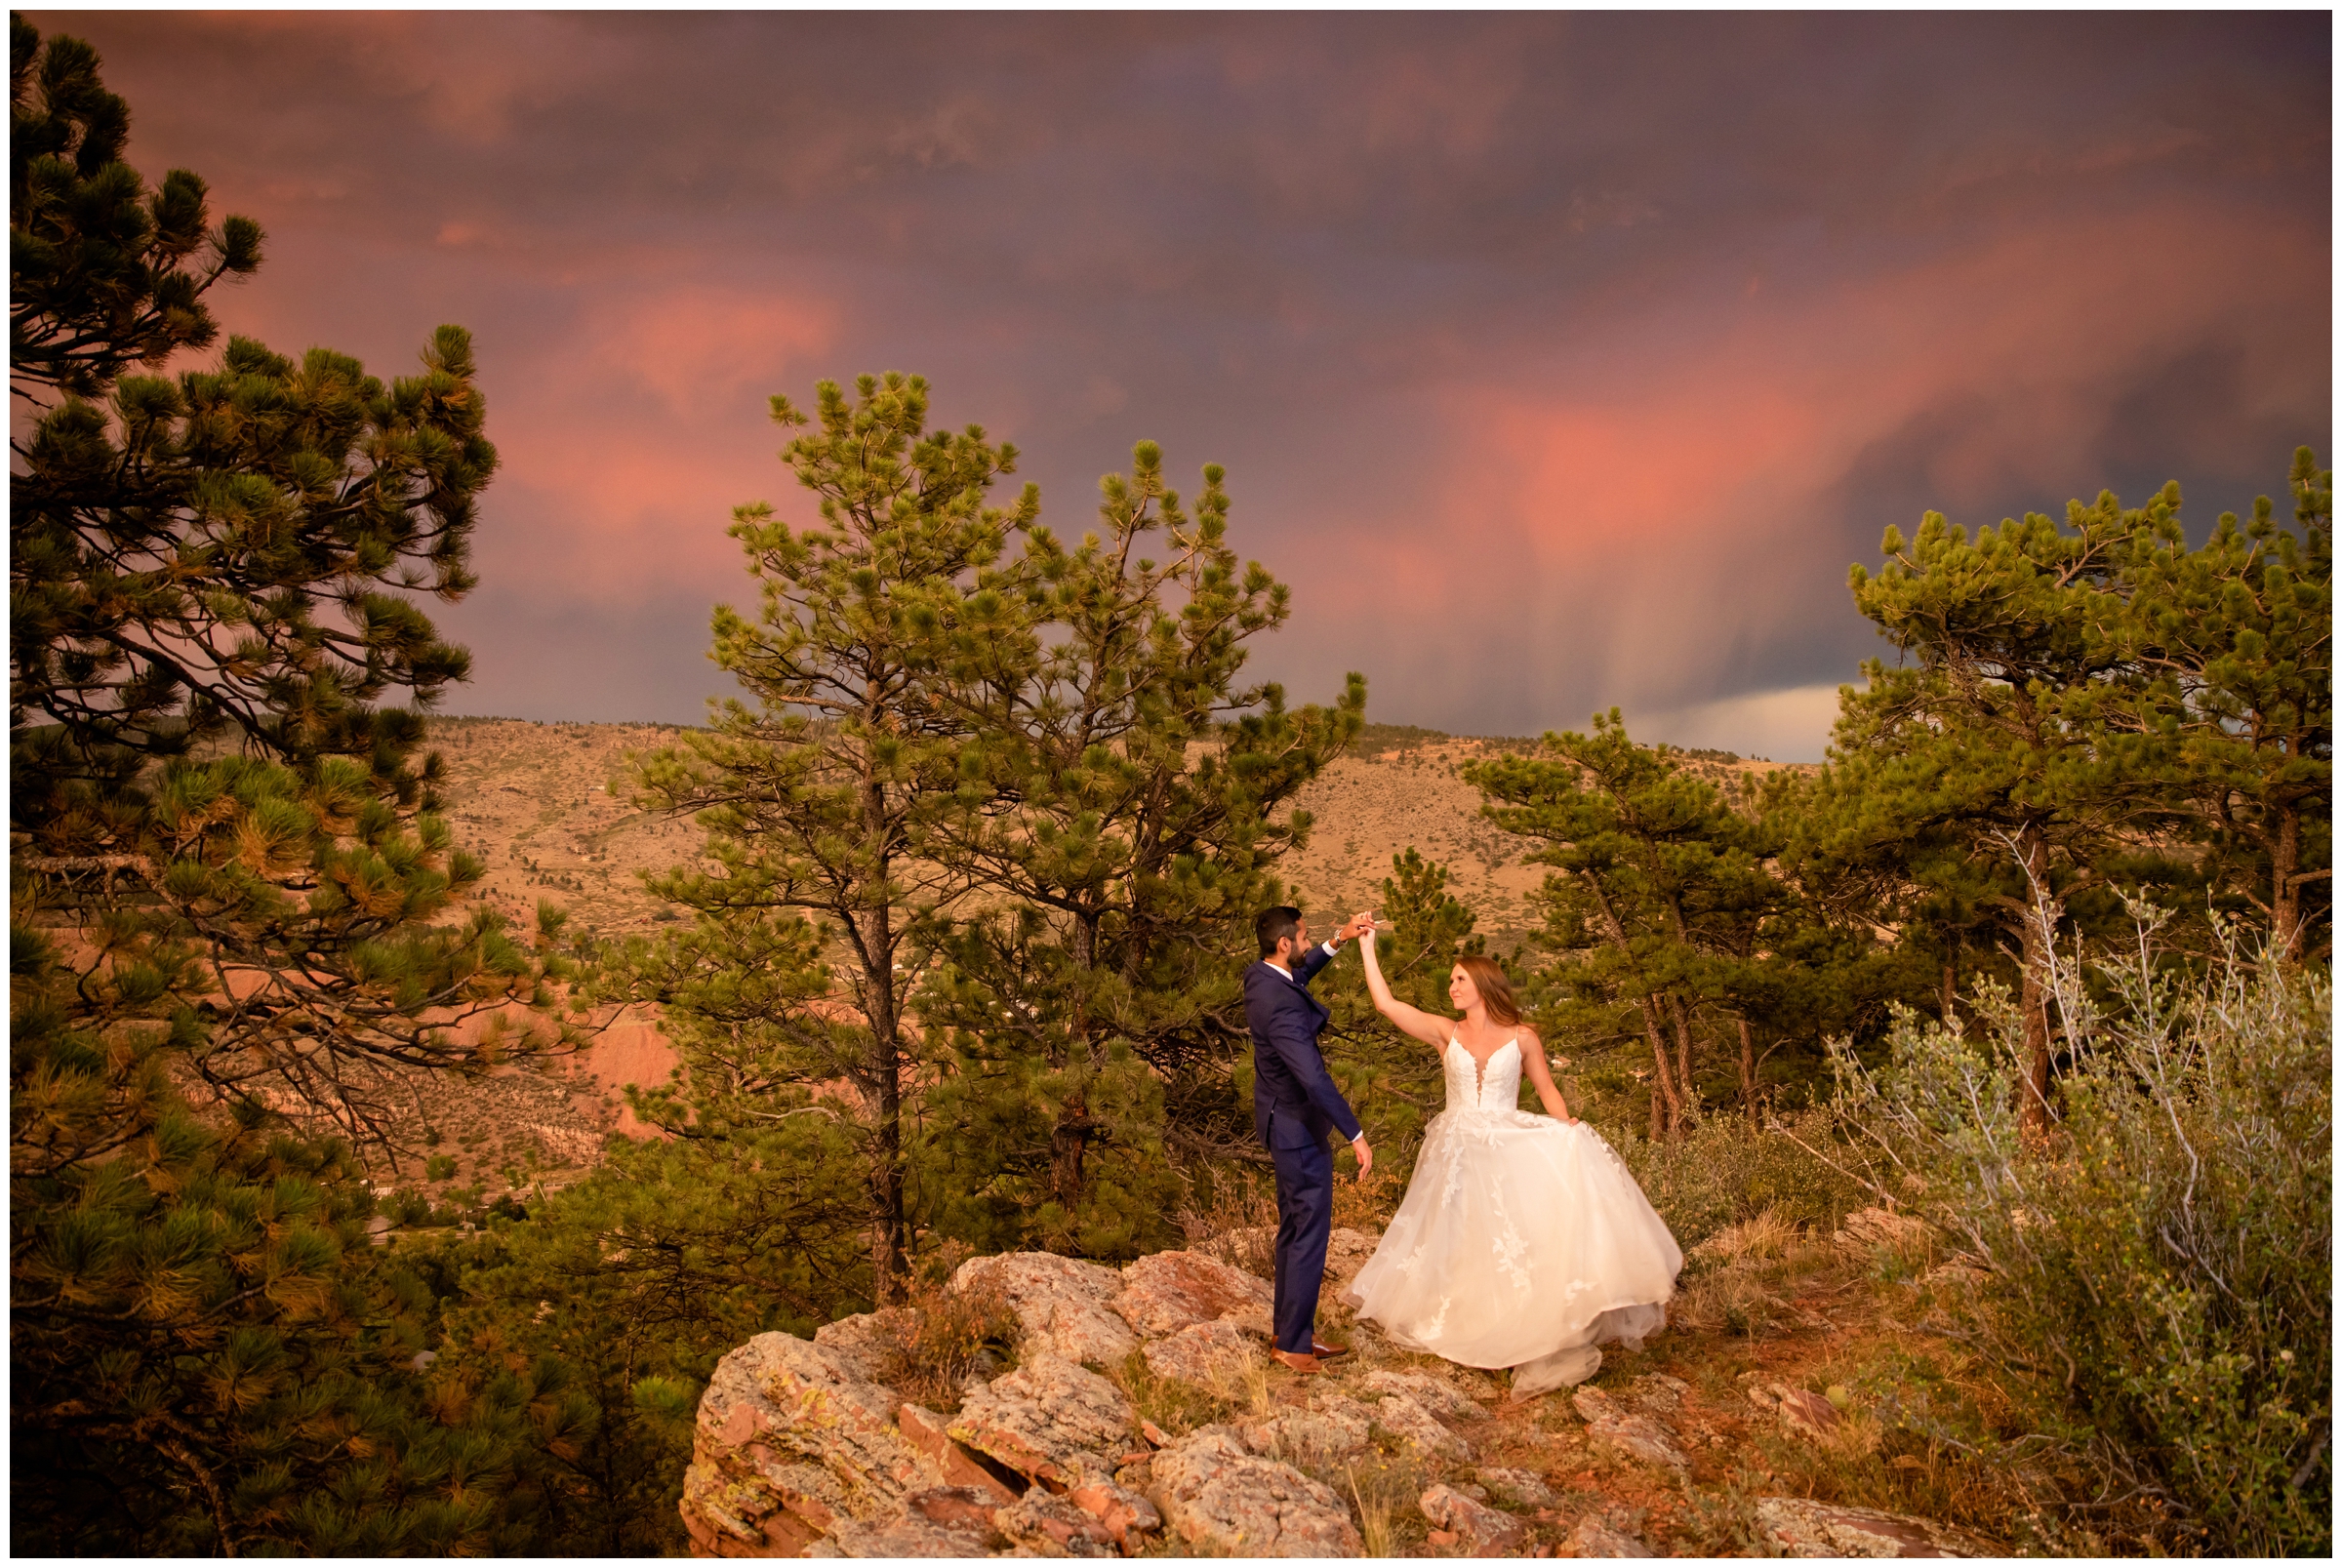 couple dancing on edge of mountain under a colorful sunset sky at Lionscrest Manor Colorado wedding